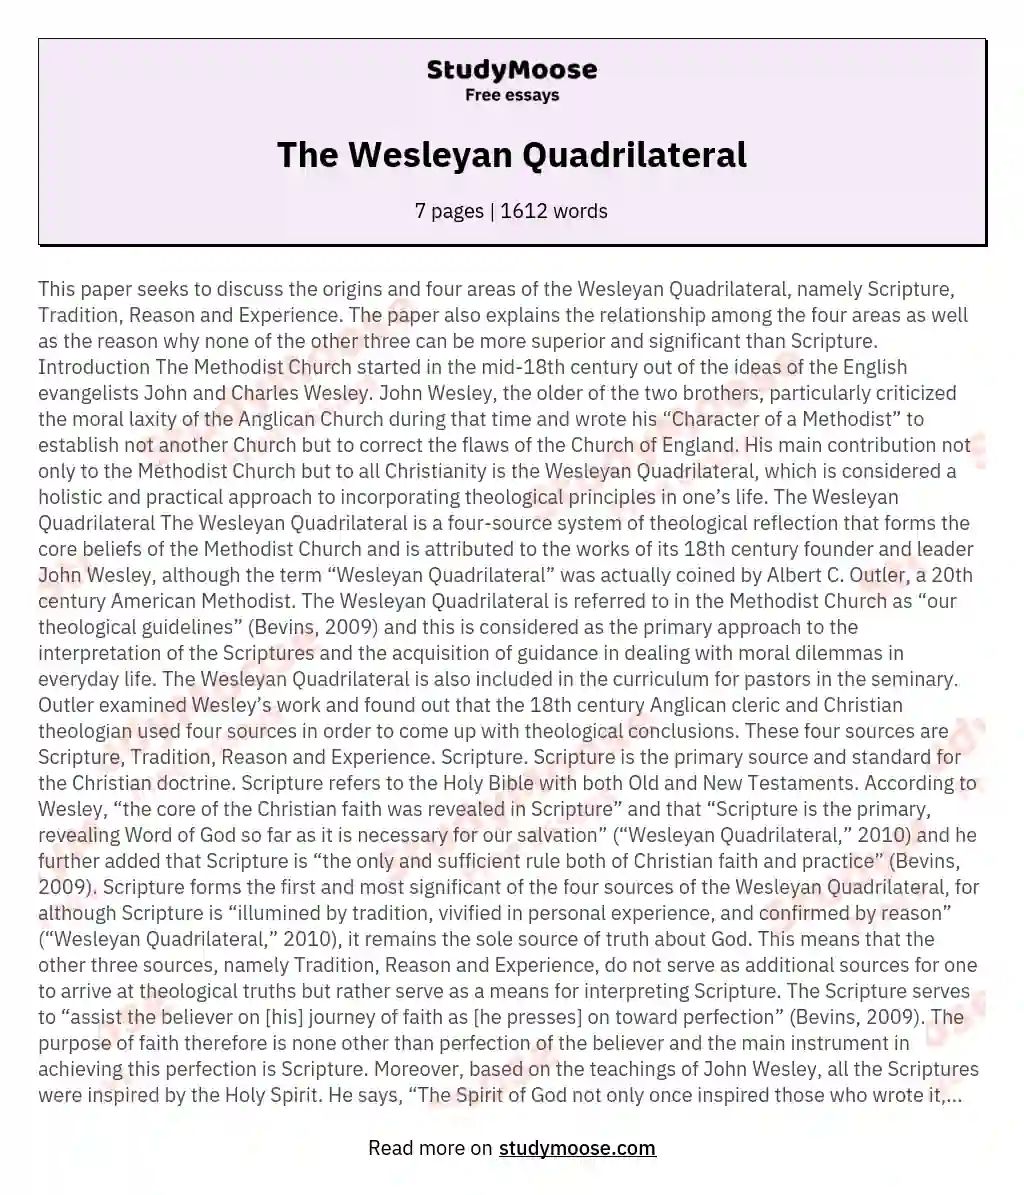 The Wesleyan Quadrilateral essay